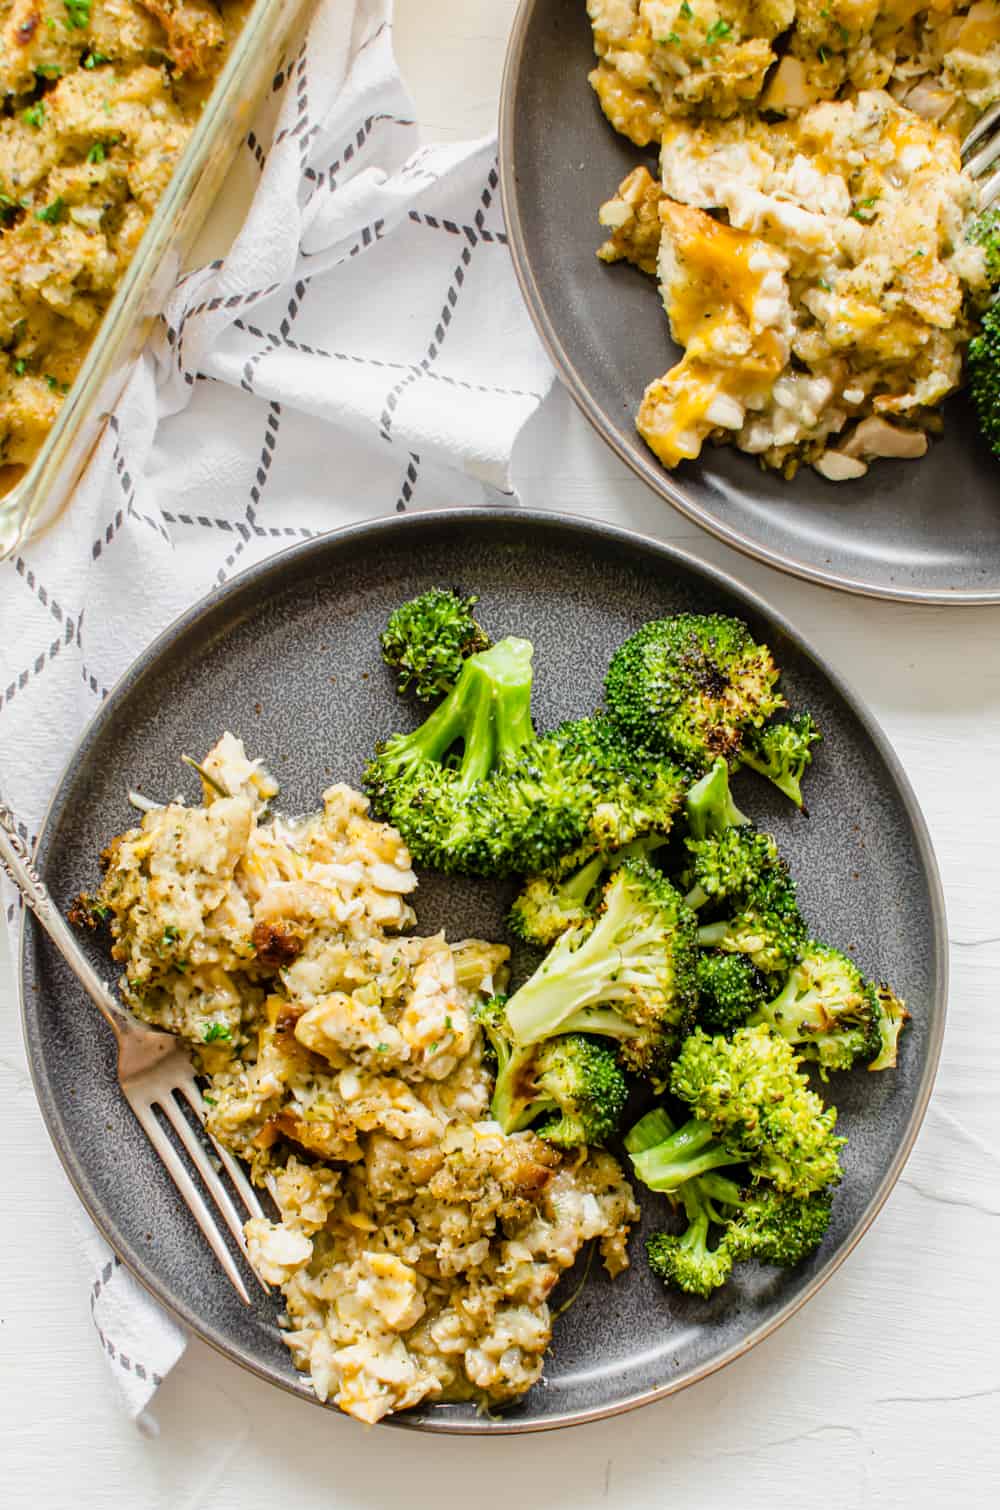 A plate with cheesy chicken and stuffing casserole and roasted broccoli.